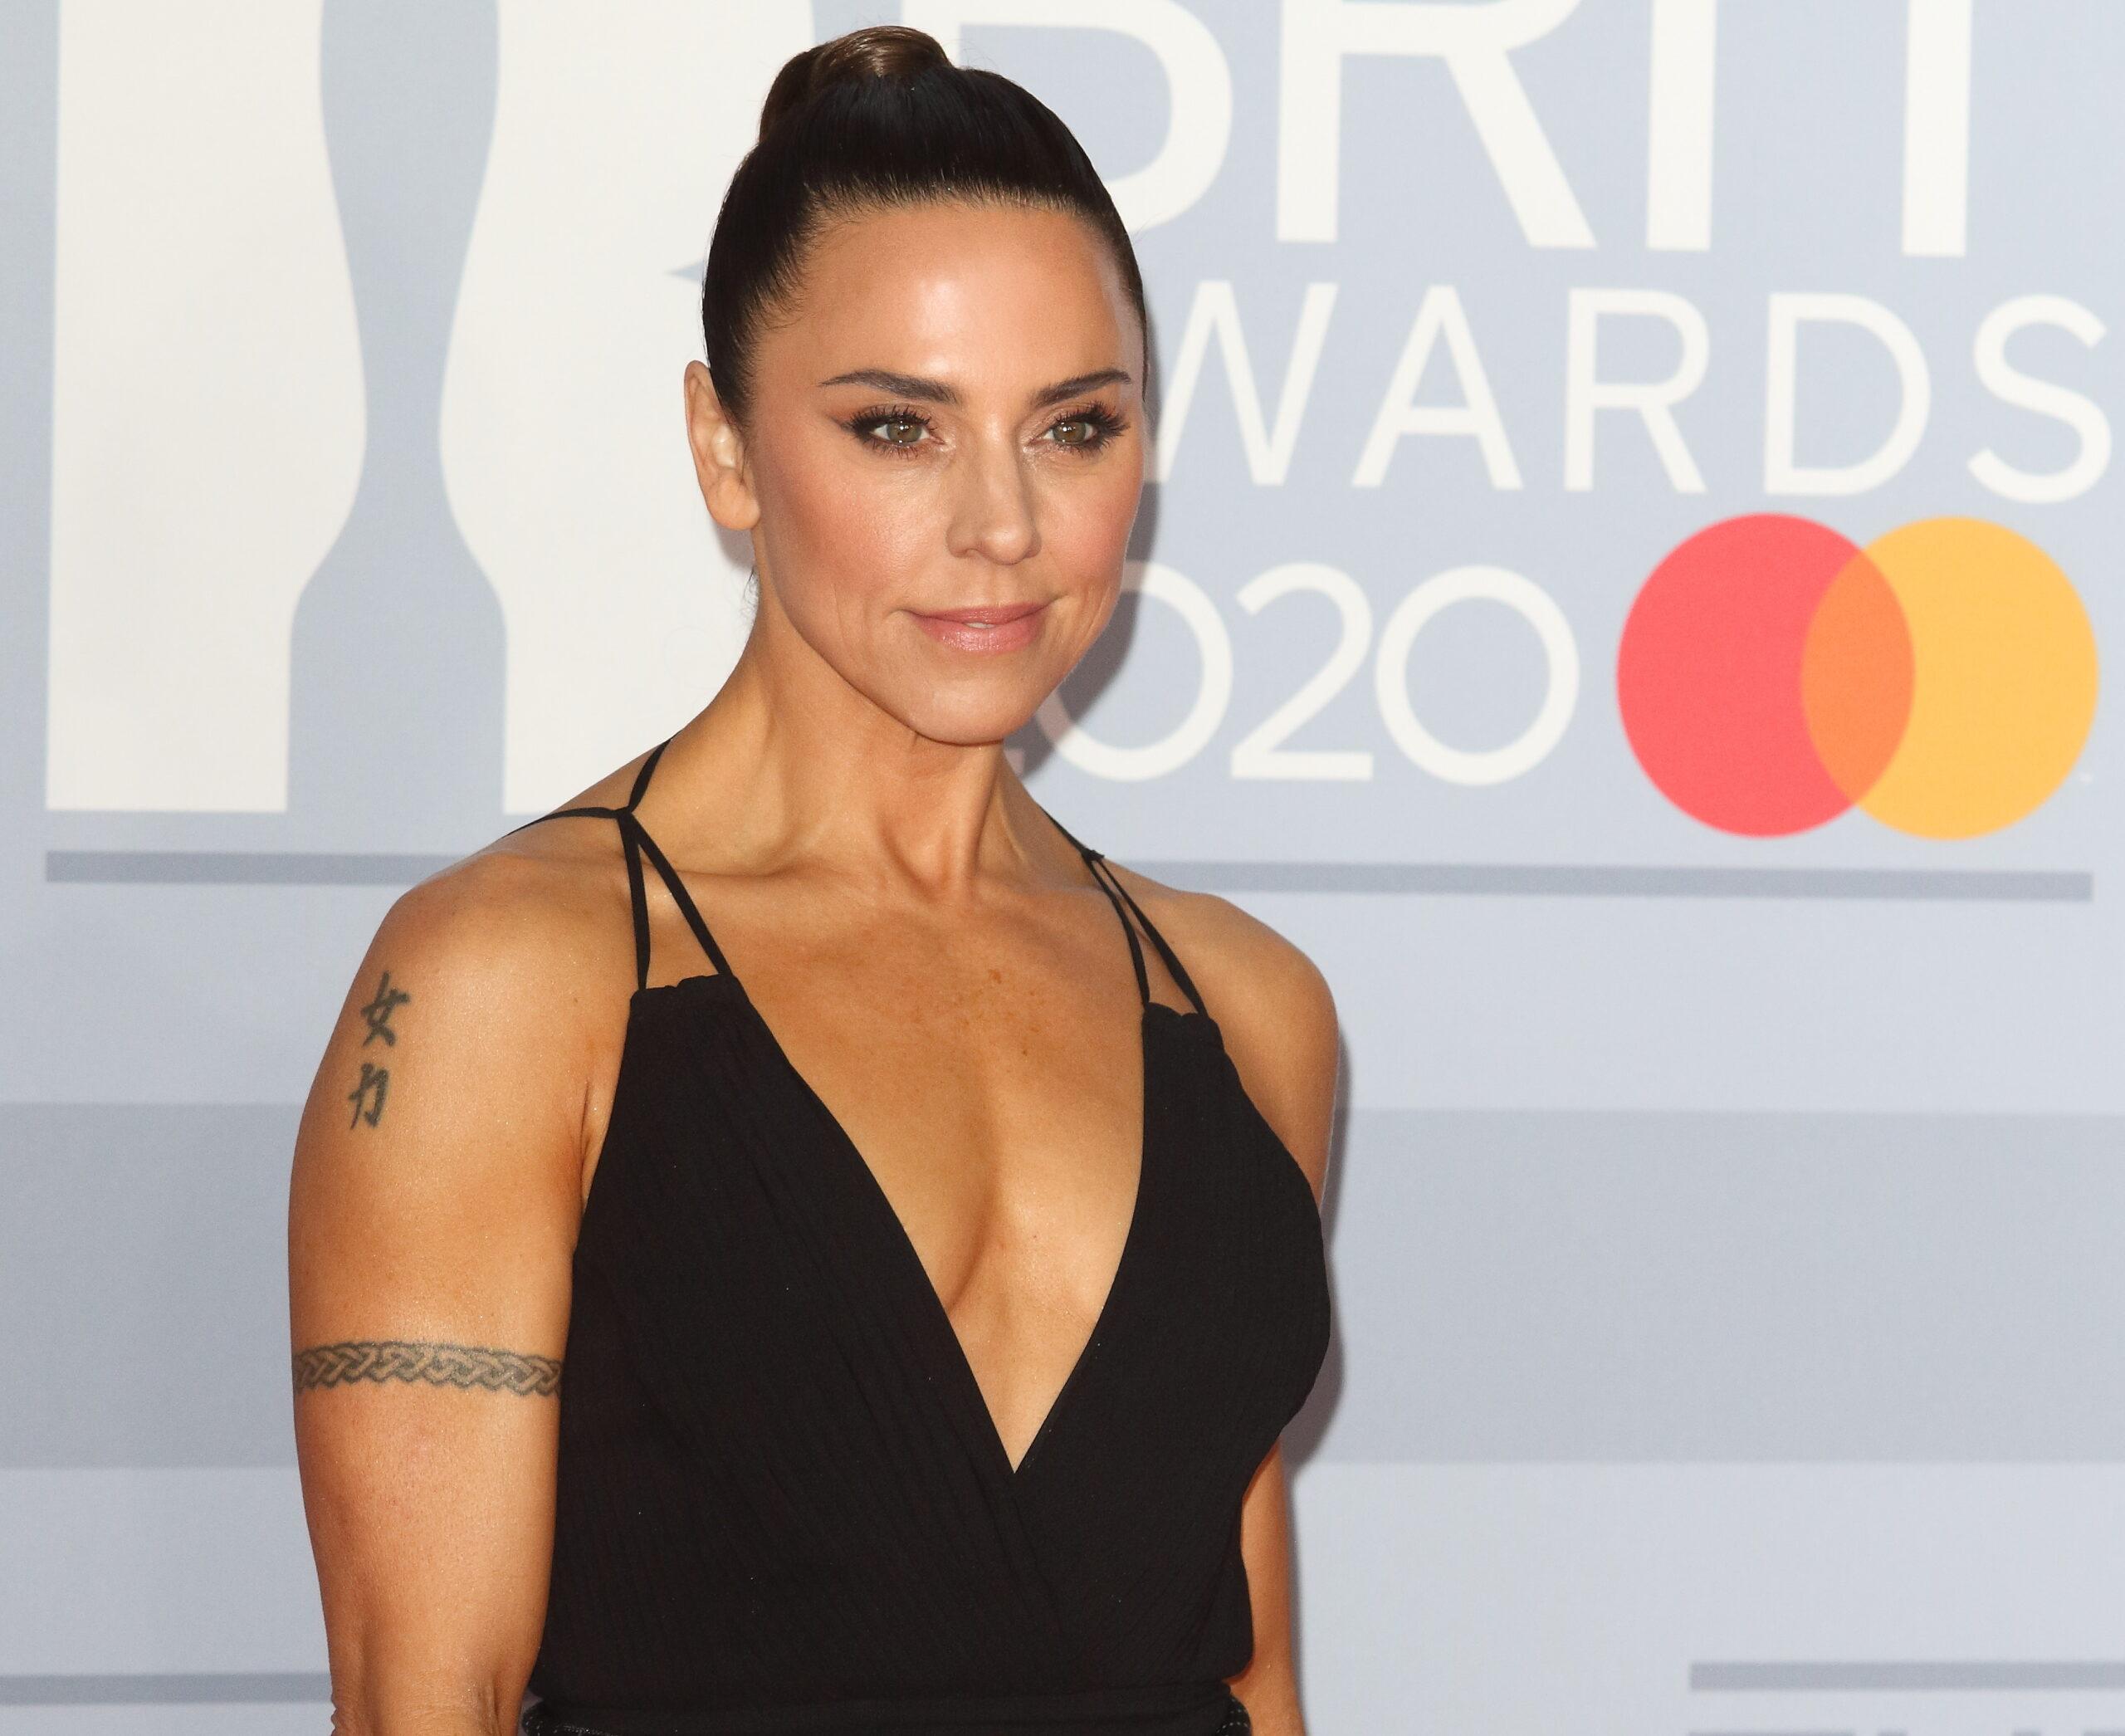 February 18, 2020, London, United Kingdom: Amber Davies attends the 40th Brit Awards Red Carpet arrivals at The O2 Arena in London. 18 Feb 2020 Pictured: February 18, 2020, London, United Kingdom: Melanie Chisholm attends the 40th Brit Awards Red Carpet arrivals at The O2 Arena in London. 